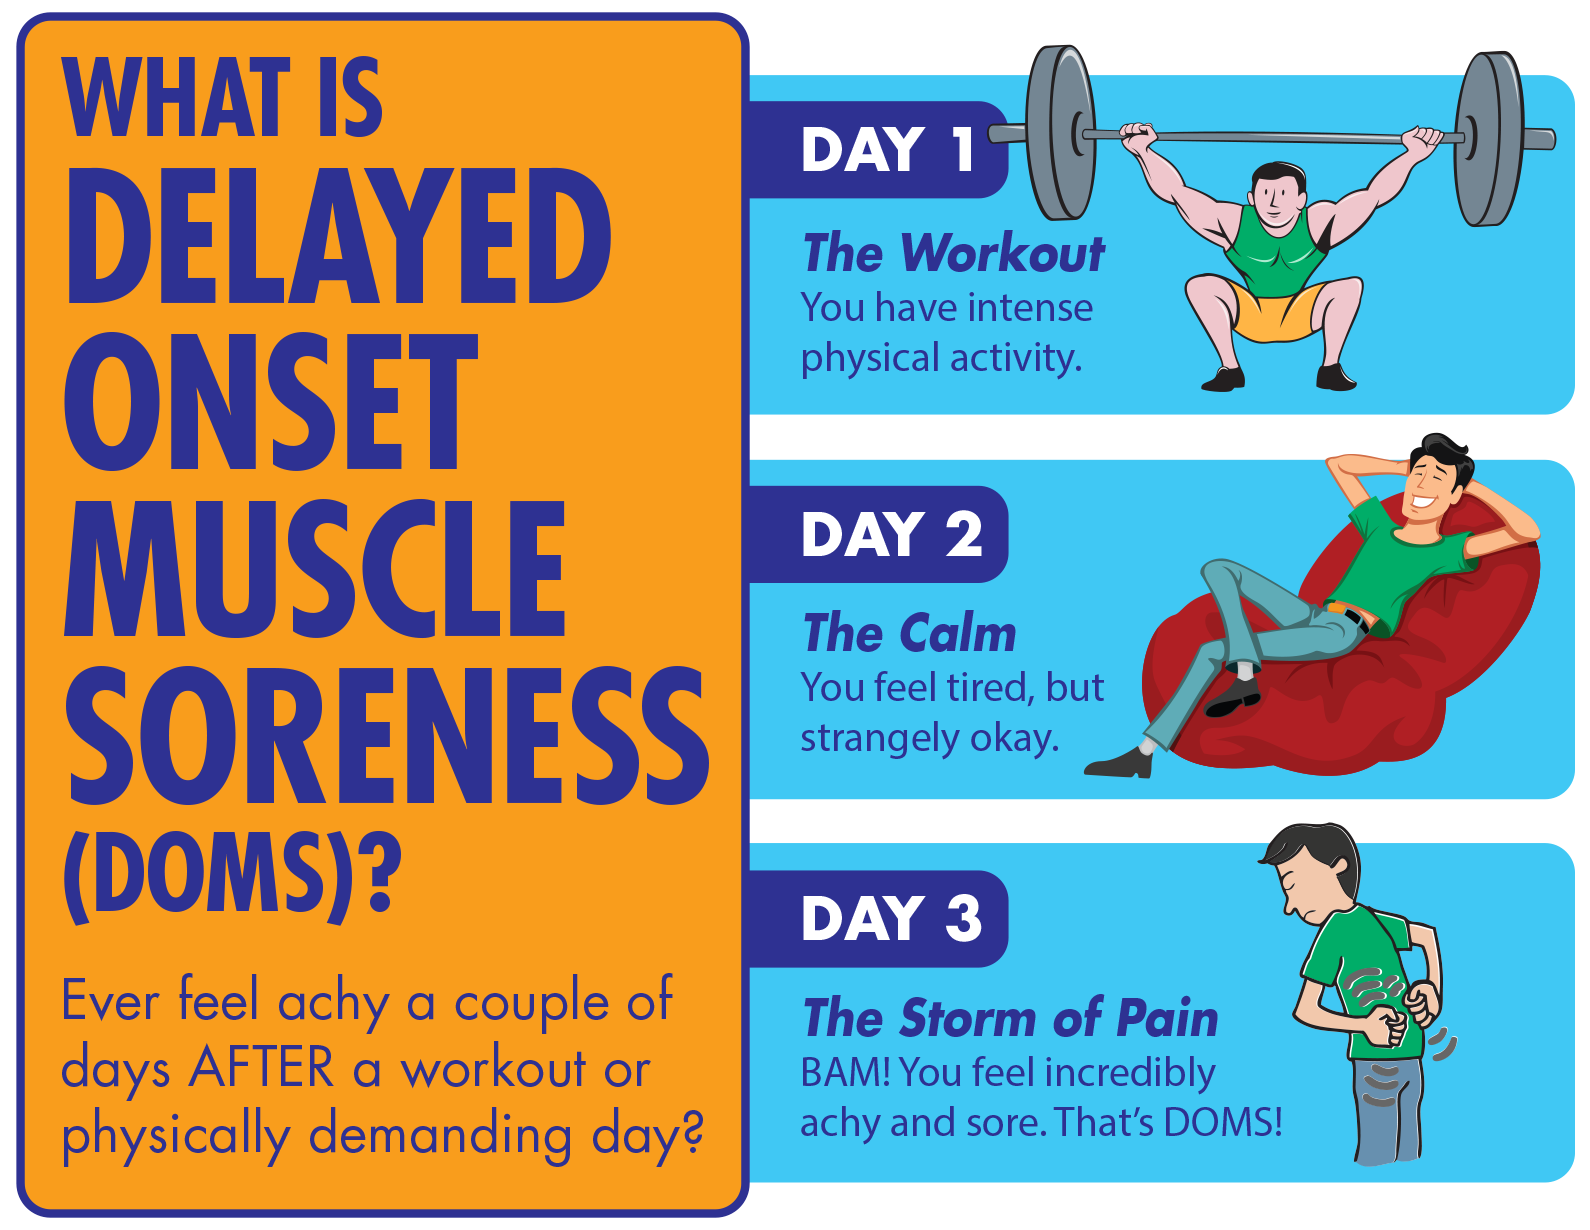 Reduce muscle soreness